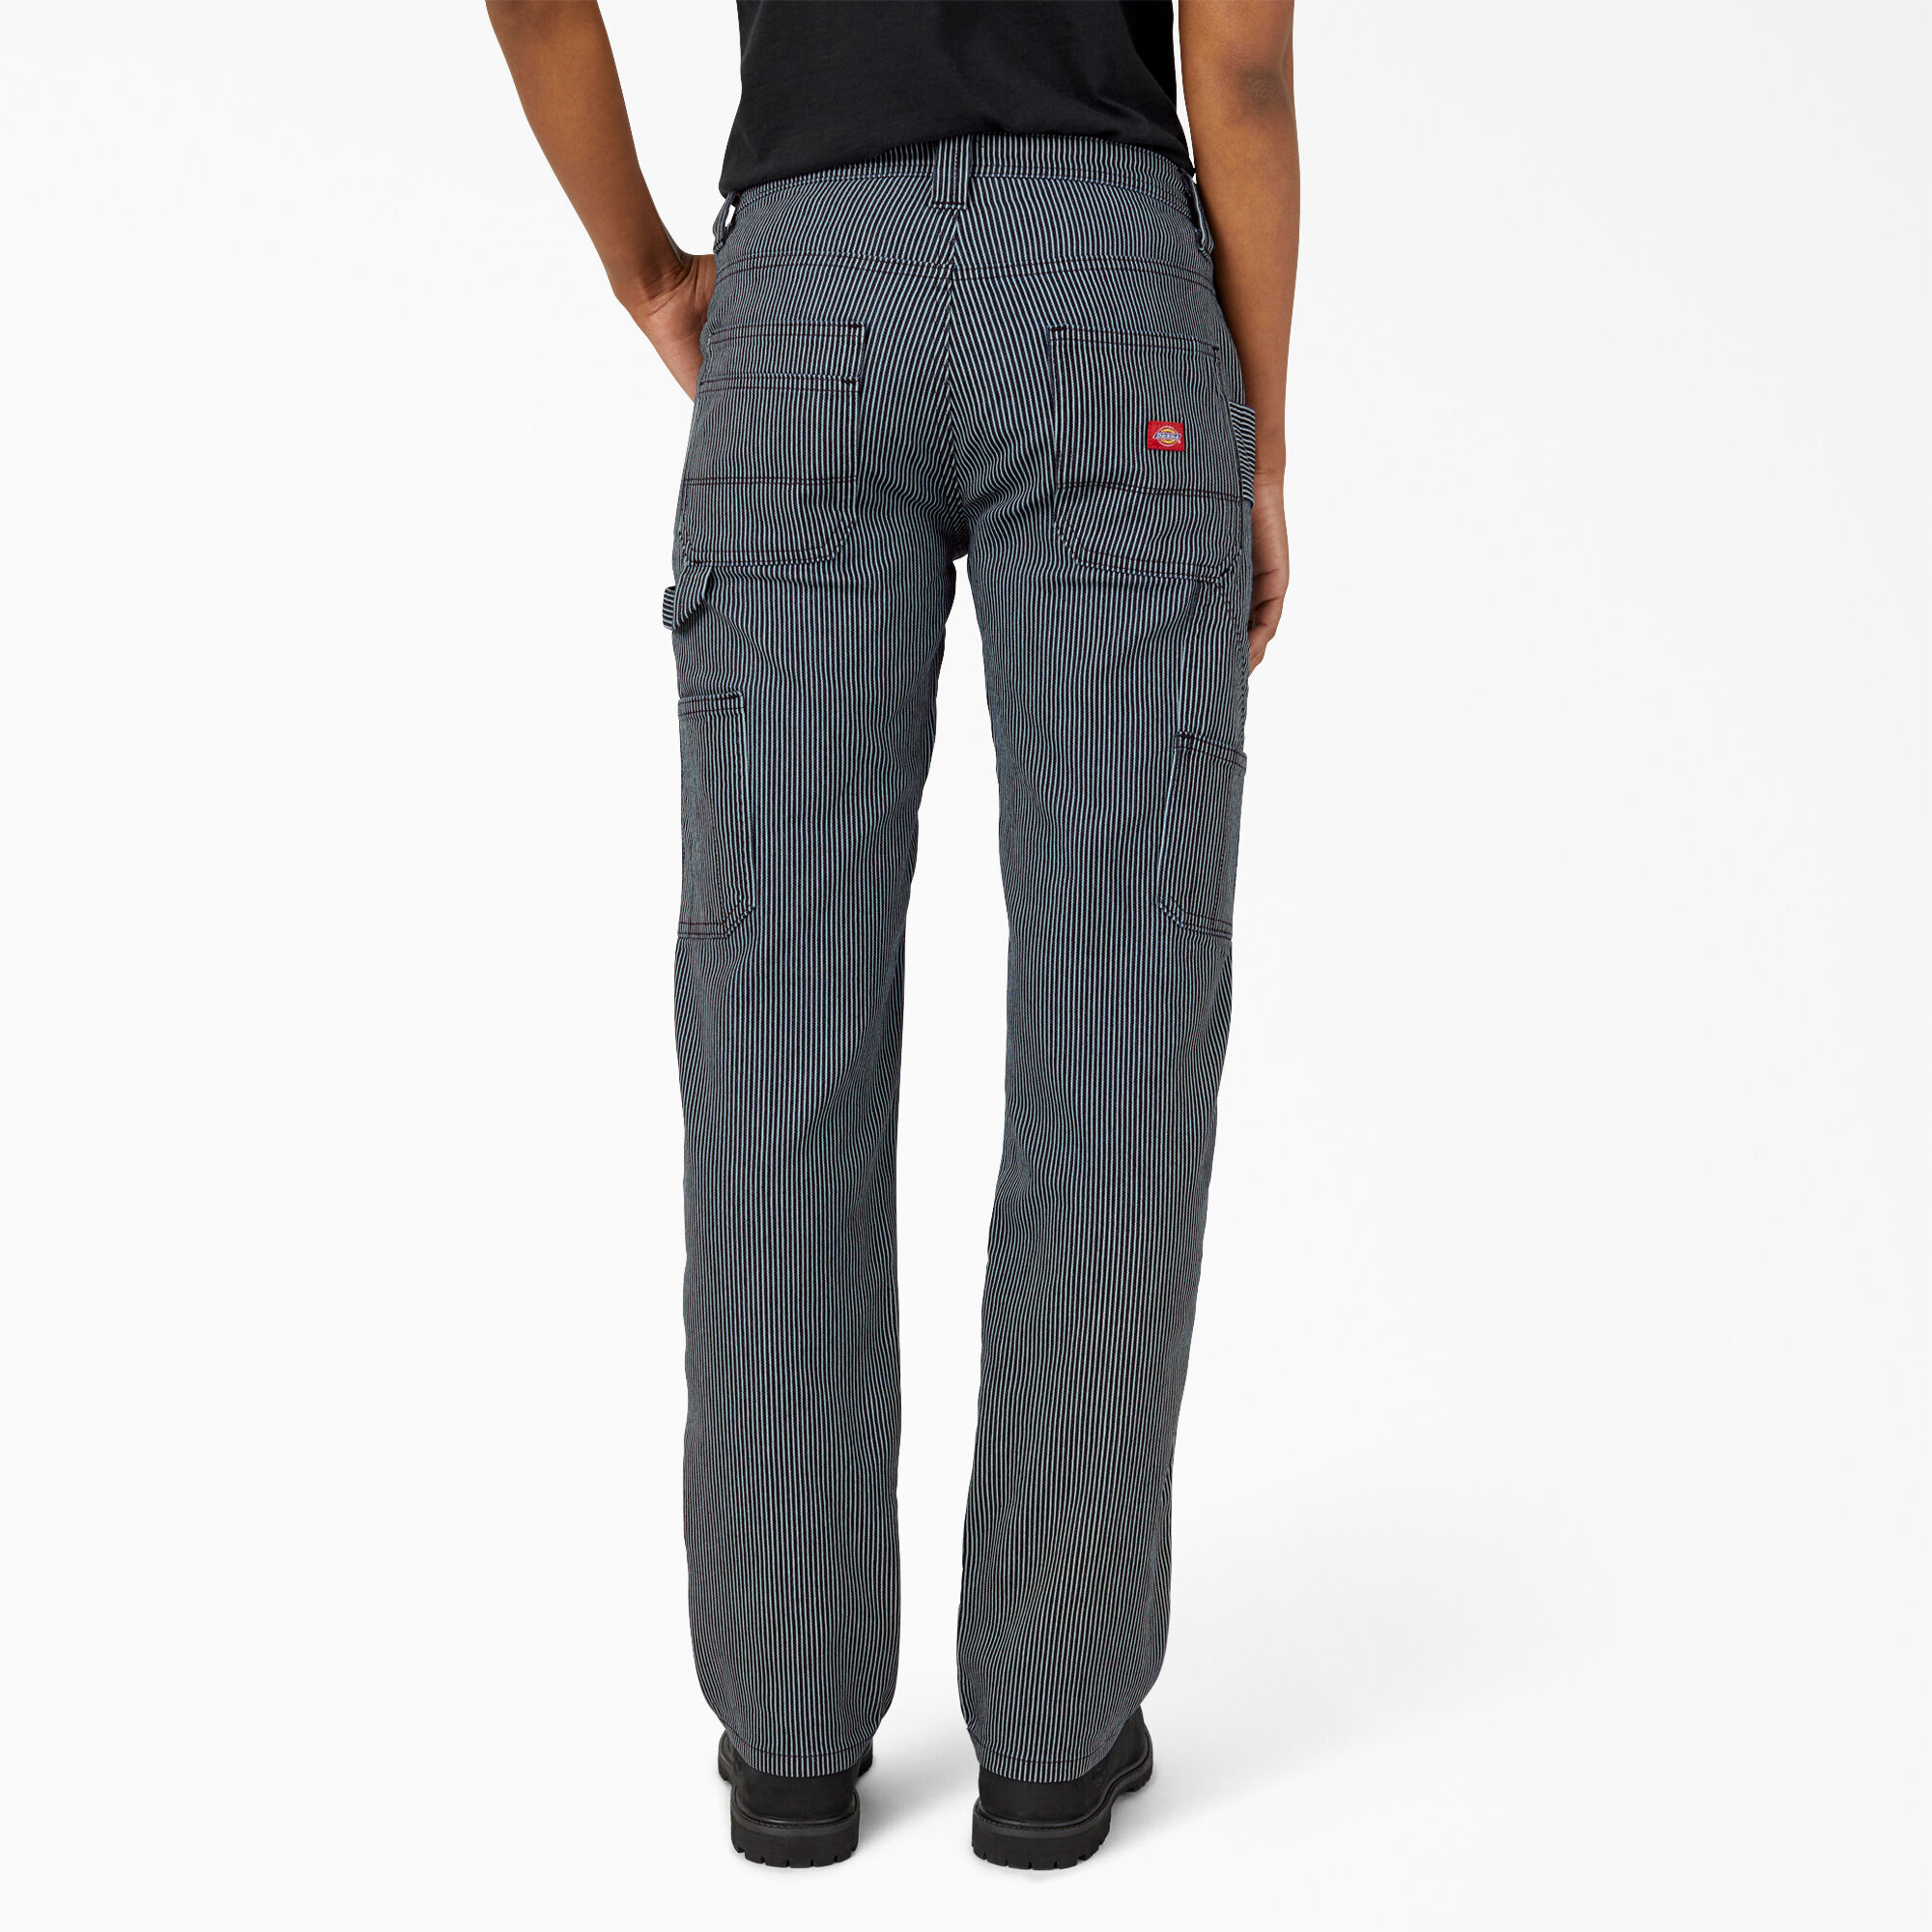 Women's FLEX Relaxed Fit Hickory Carpenter - Dickies